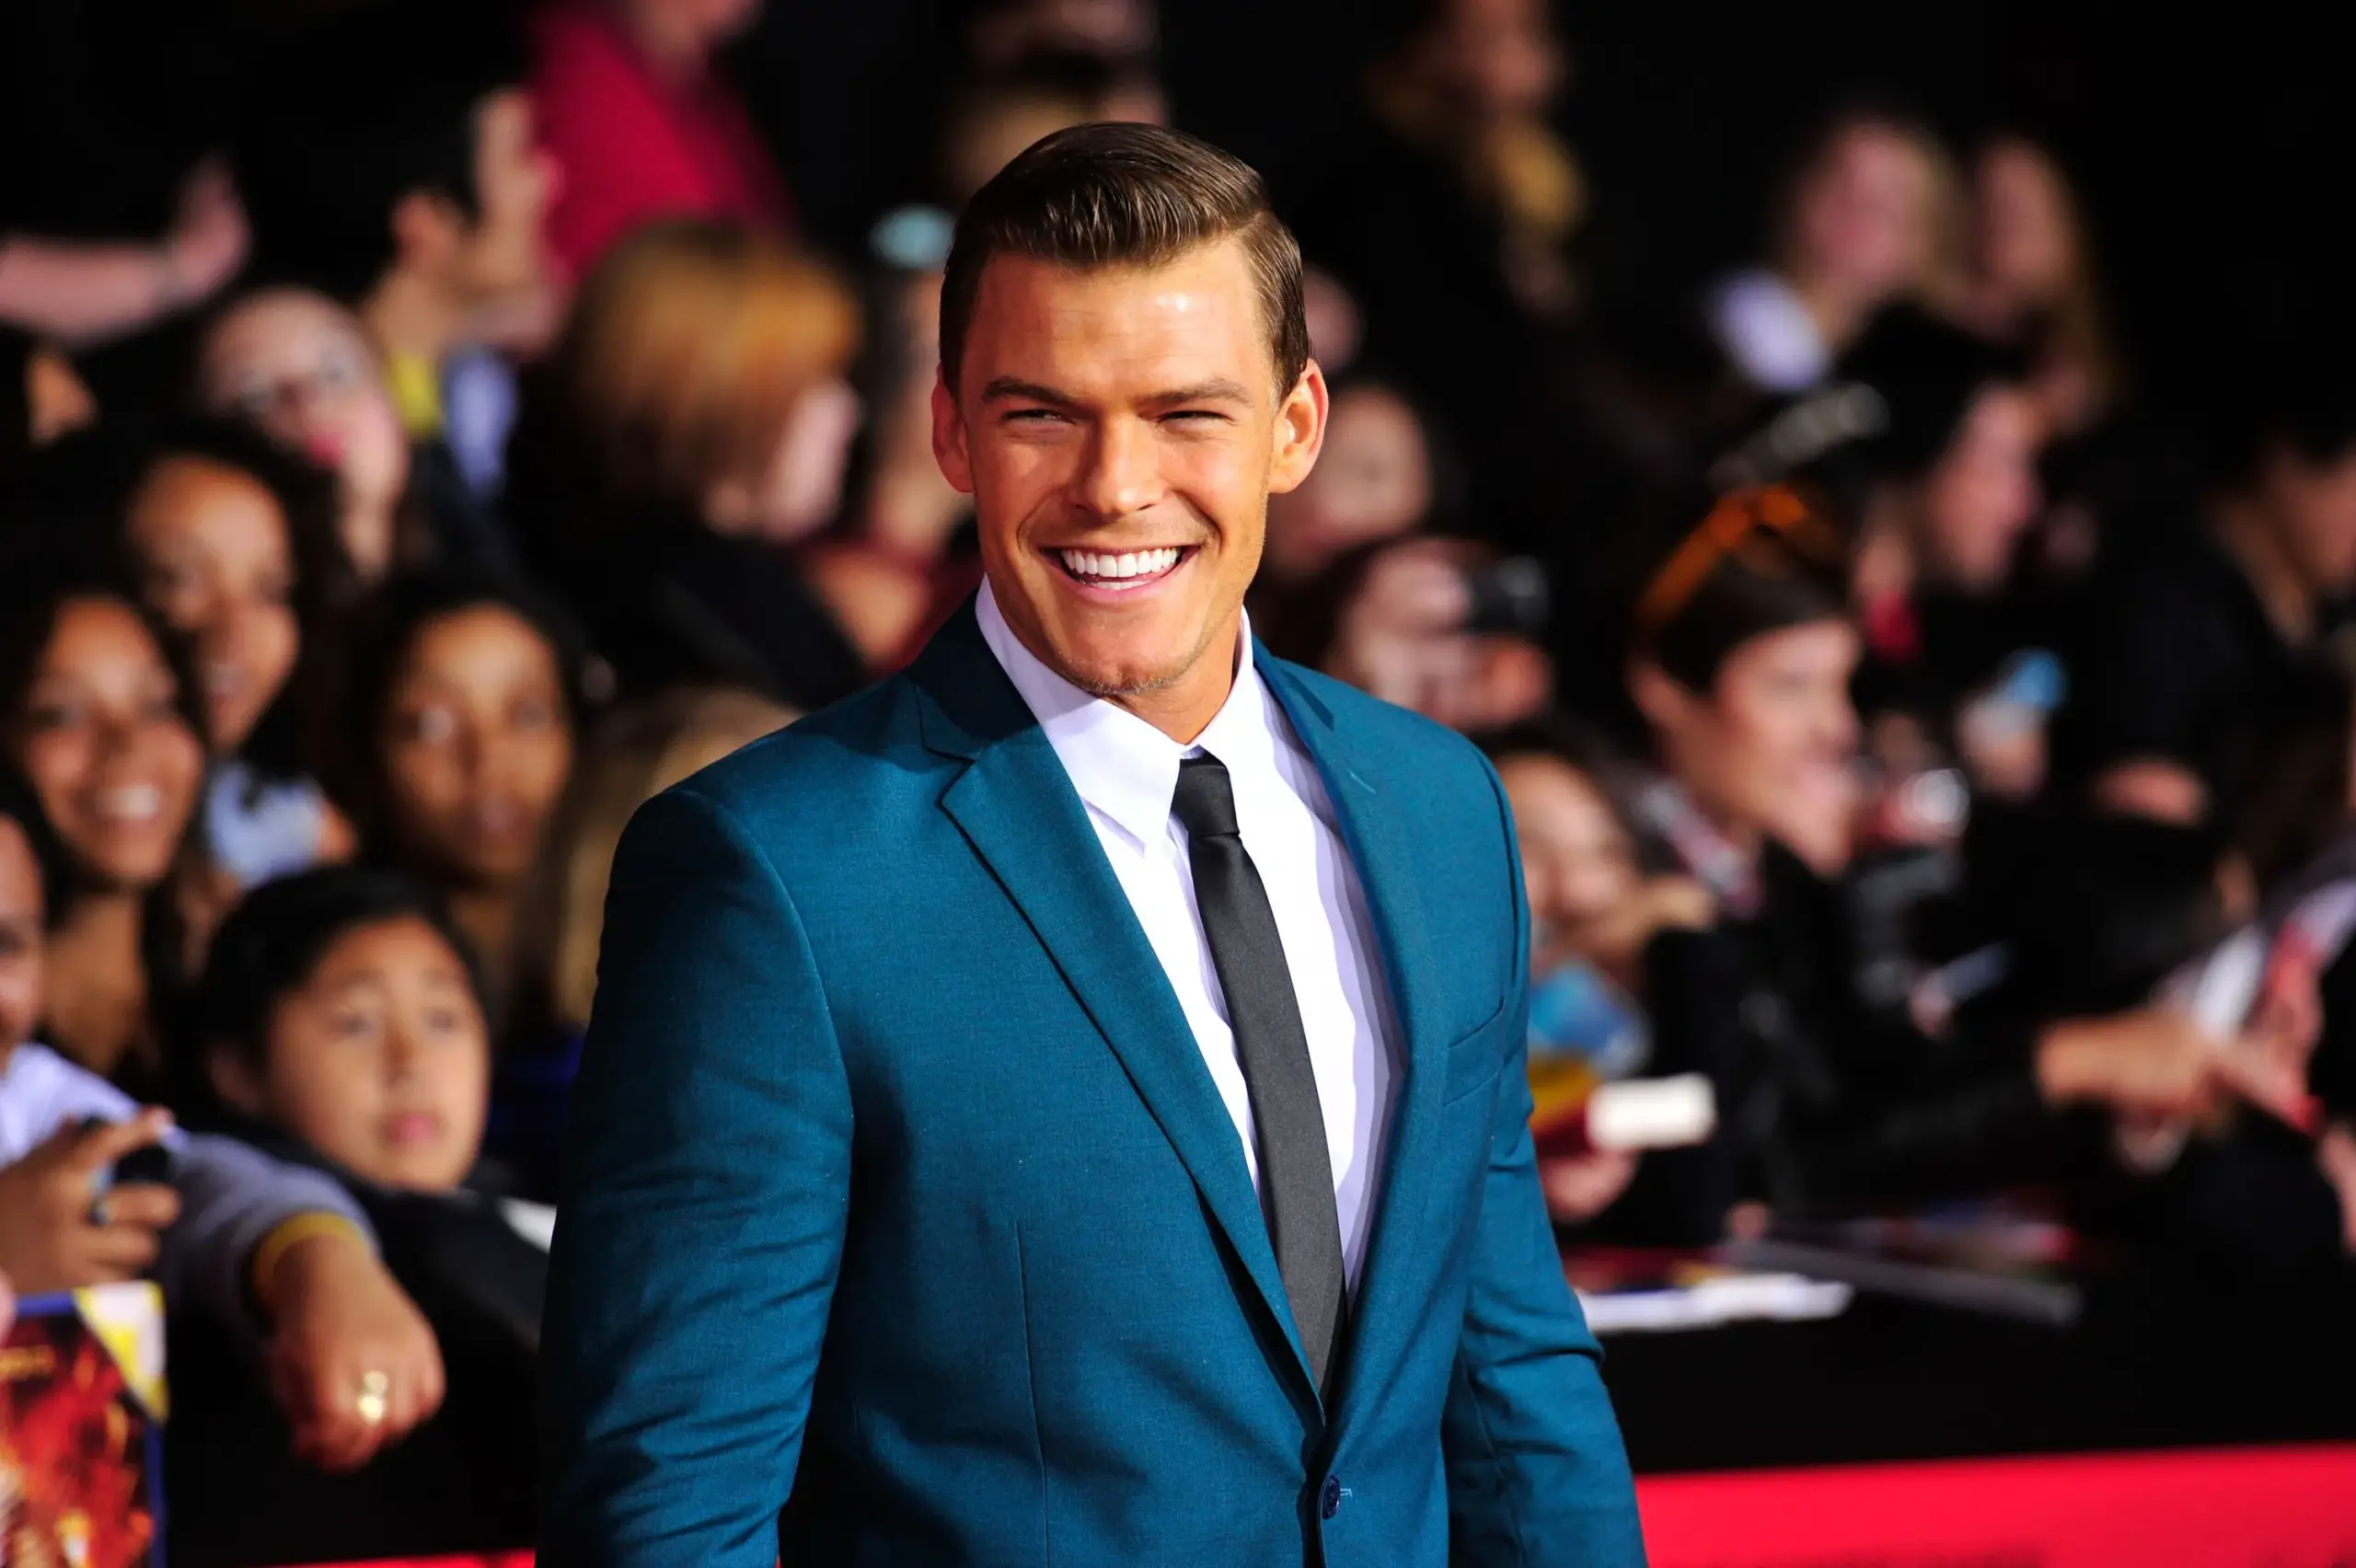 How Tall & Big is Alan Ritchson?